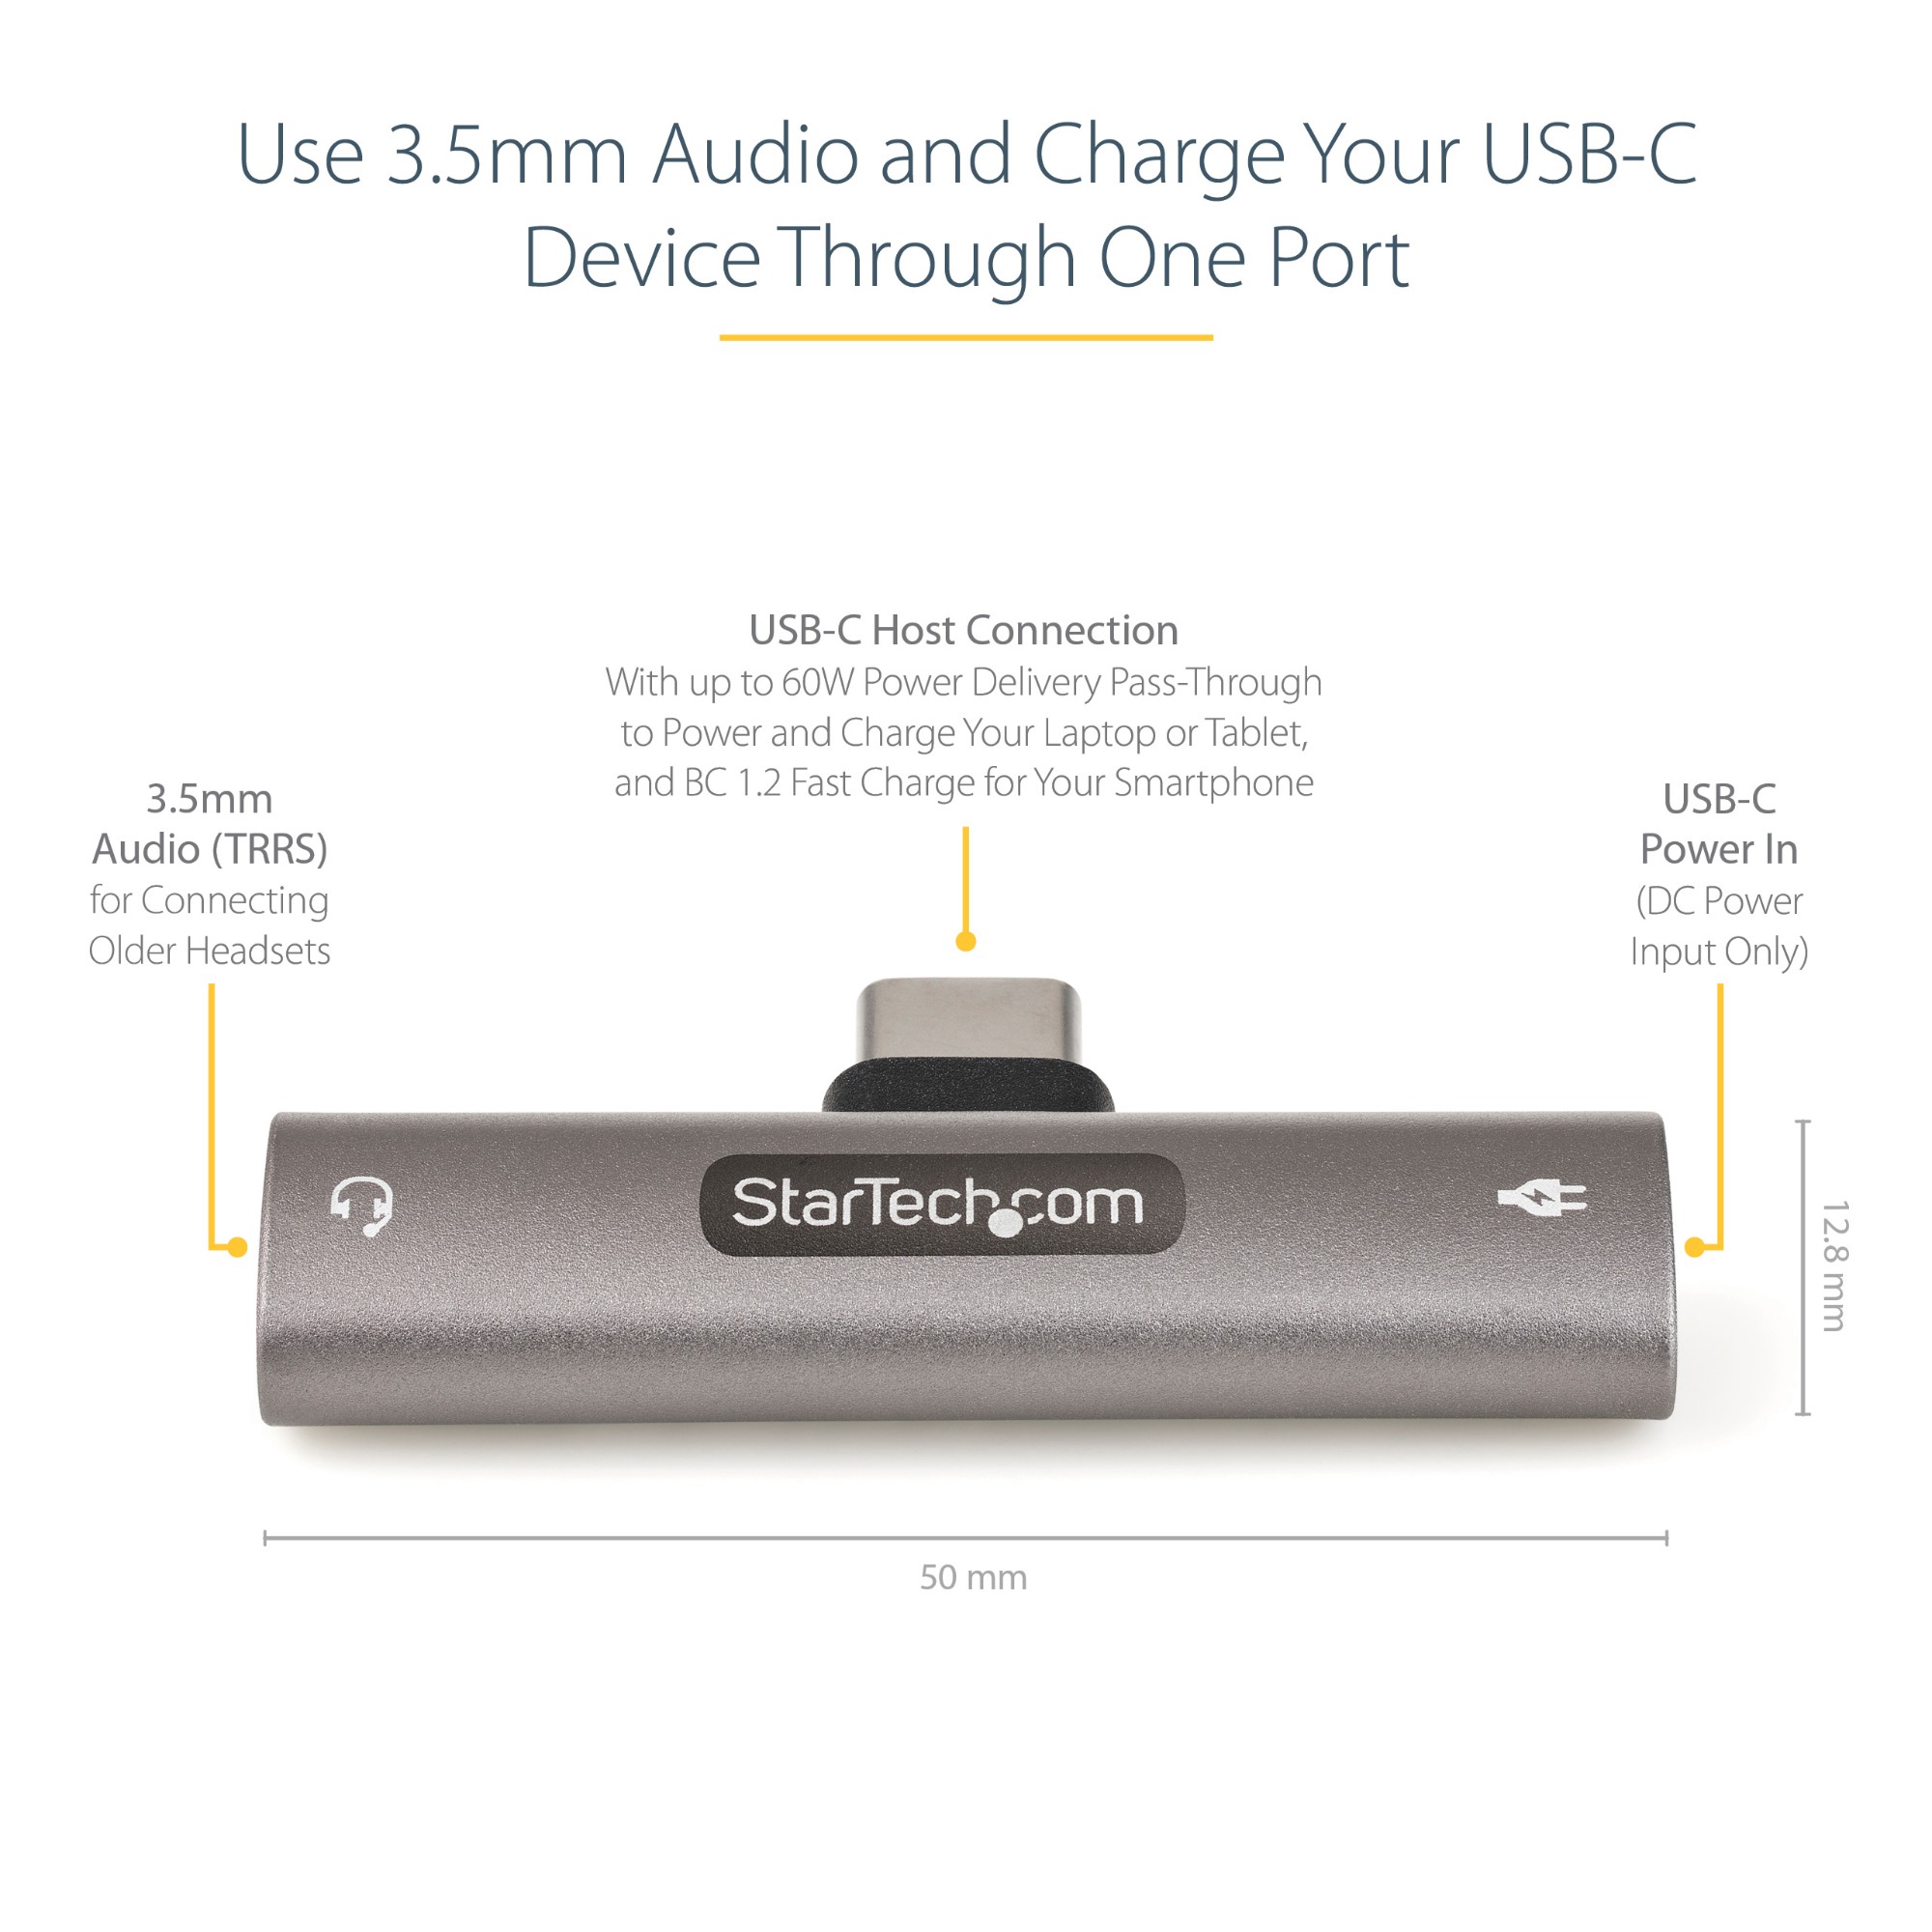 StarTech.com USB C Audio &amp; Charge Adapter - USB-C Audio Adapter w/ 3.5mm TRRS Headphone/Headset Jack and 60W USB Type-C Power Delivery Pass-through Charger - For USB-C Phone/Tablet/Laptop